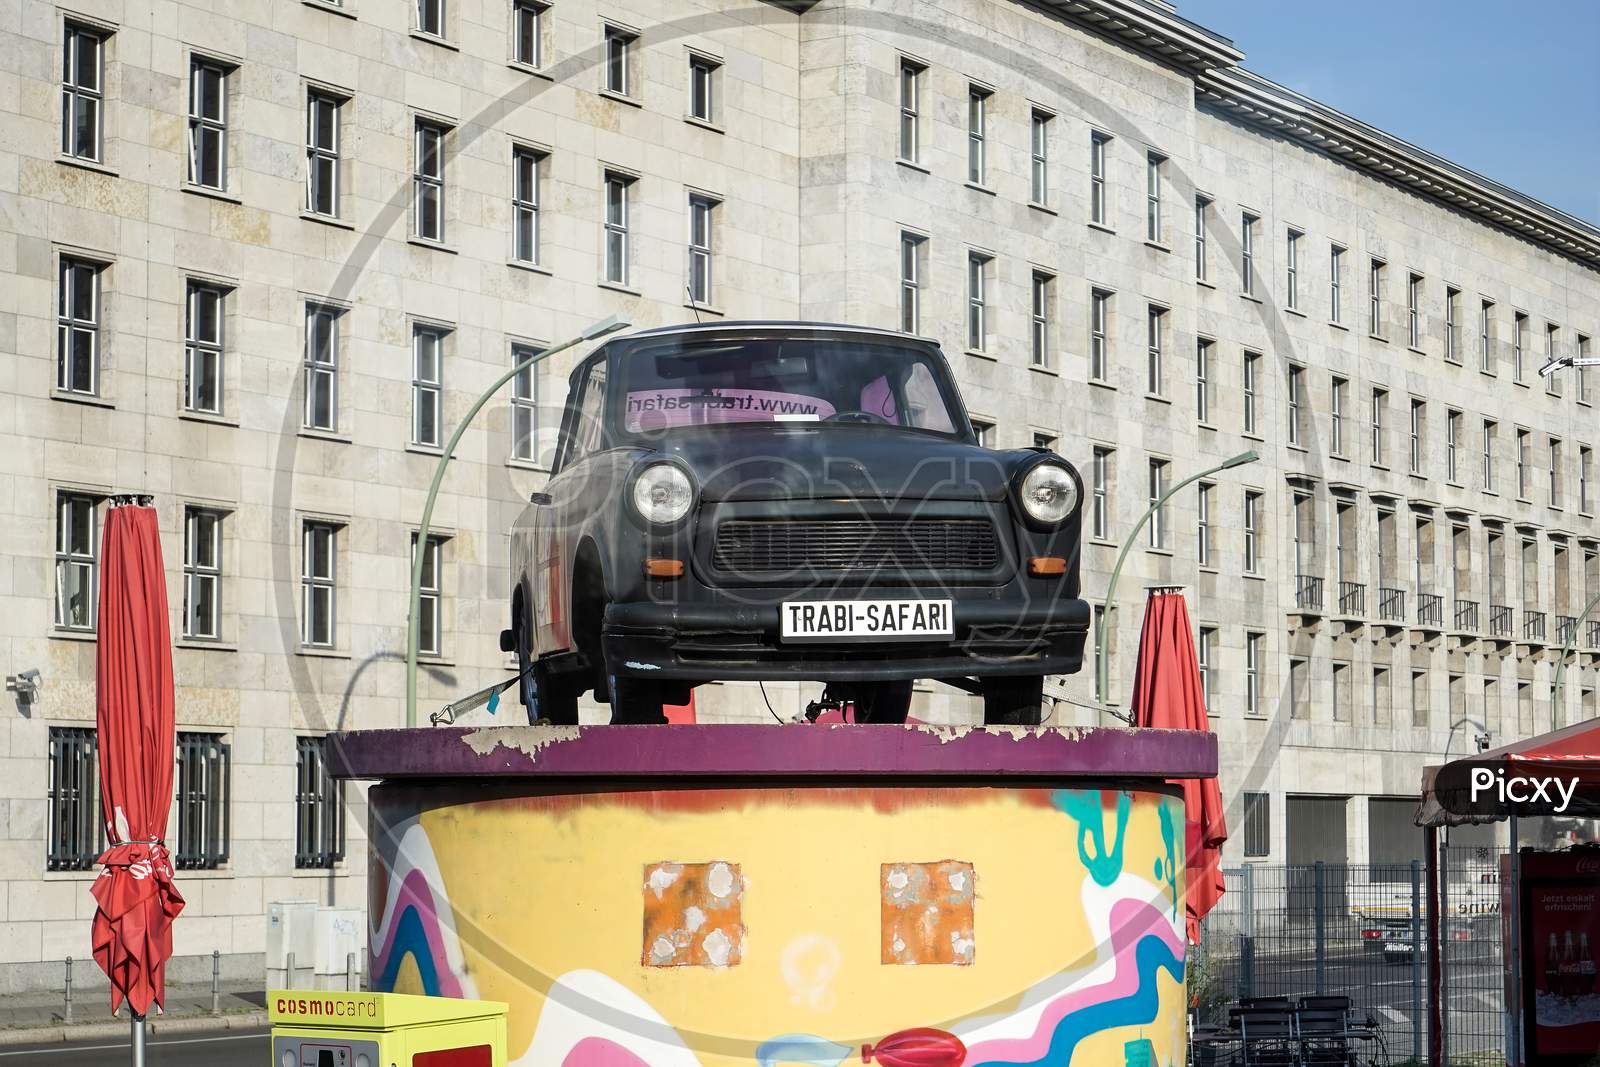 Old Trabant Car On Display In Berlin